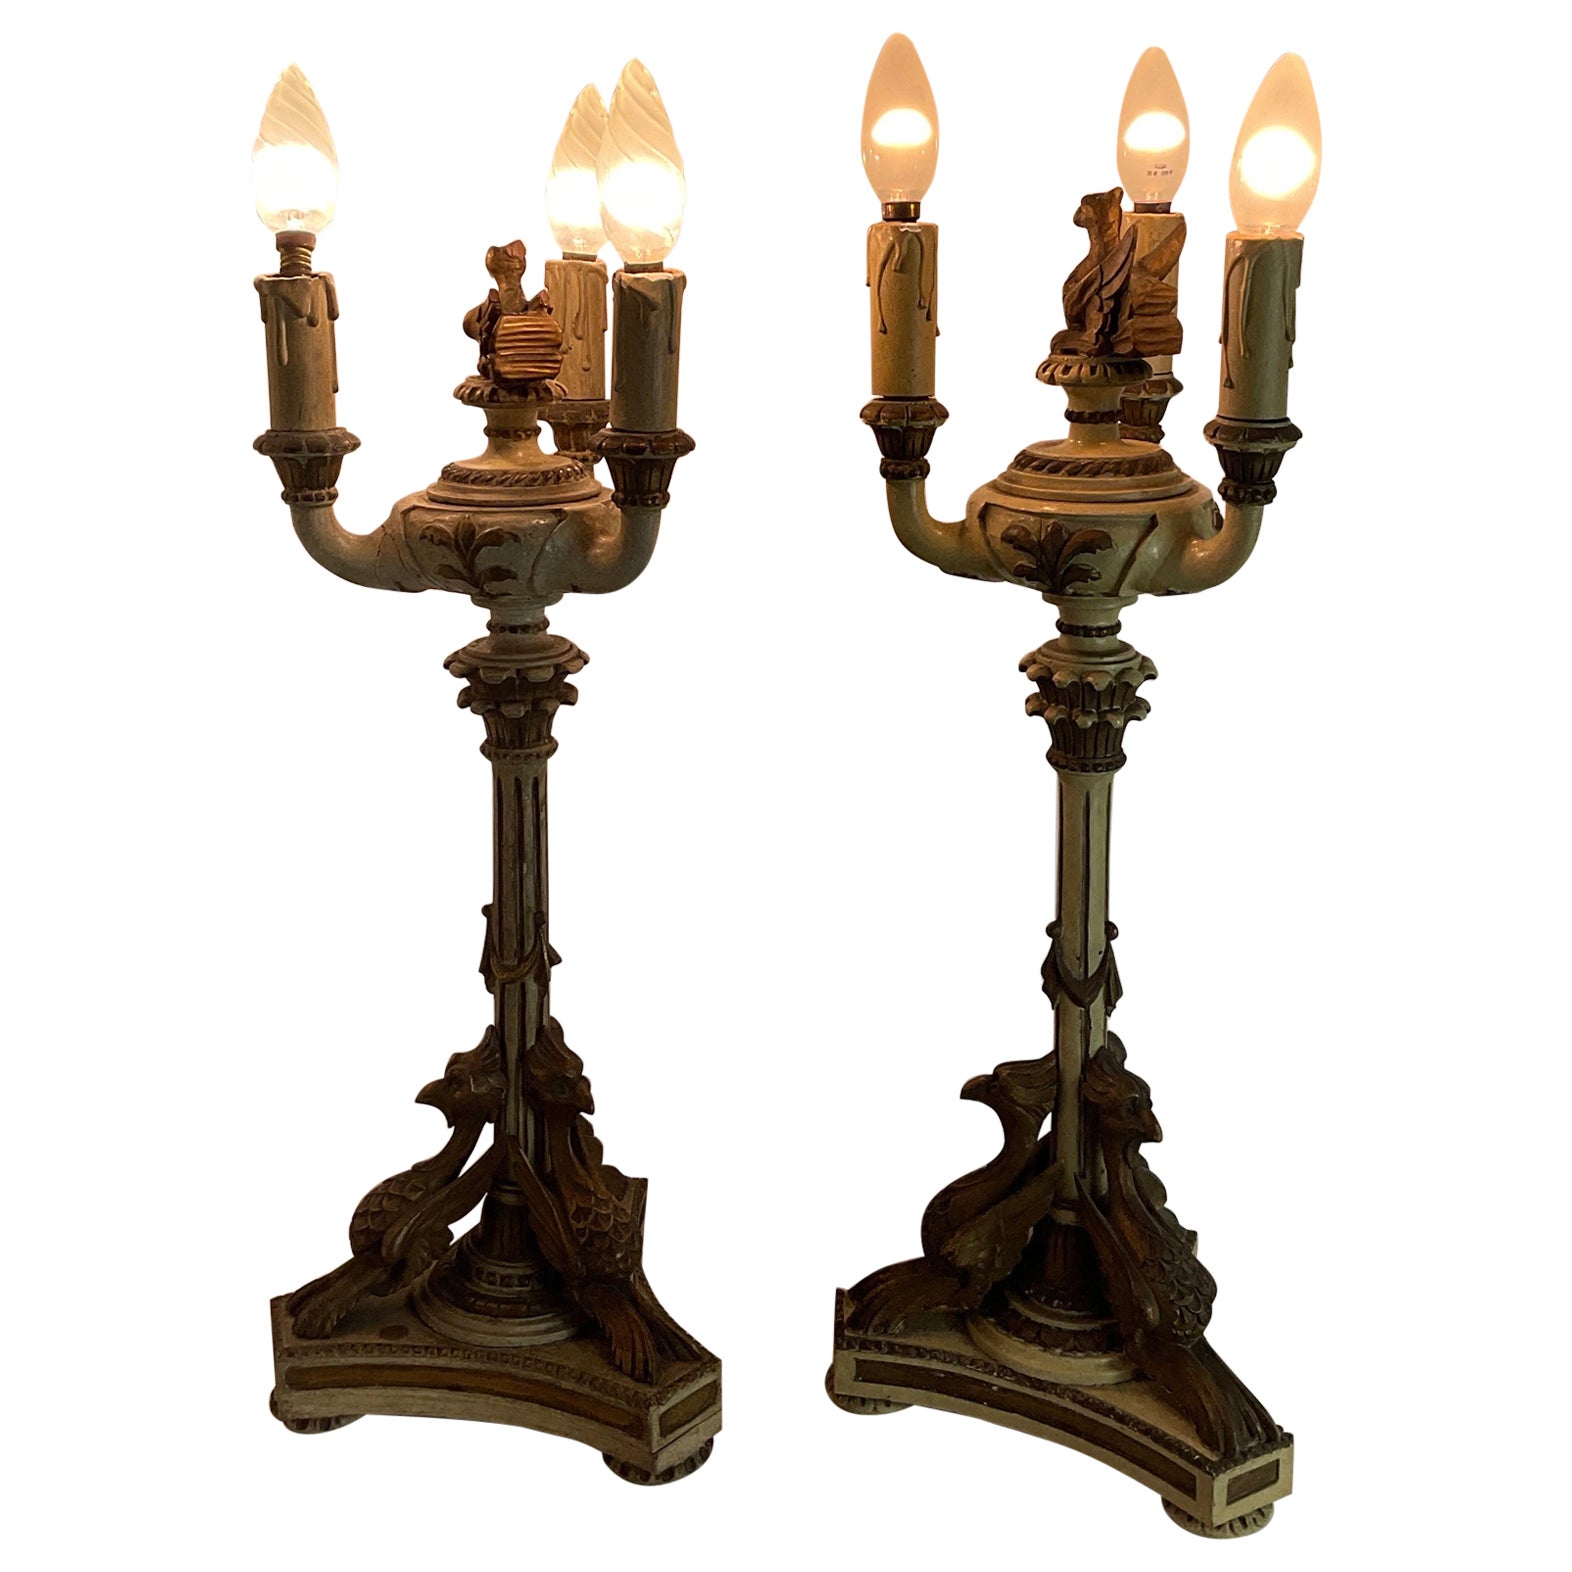 Impero  style Lacquered and gilded wood candlesticks from the late 1800s